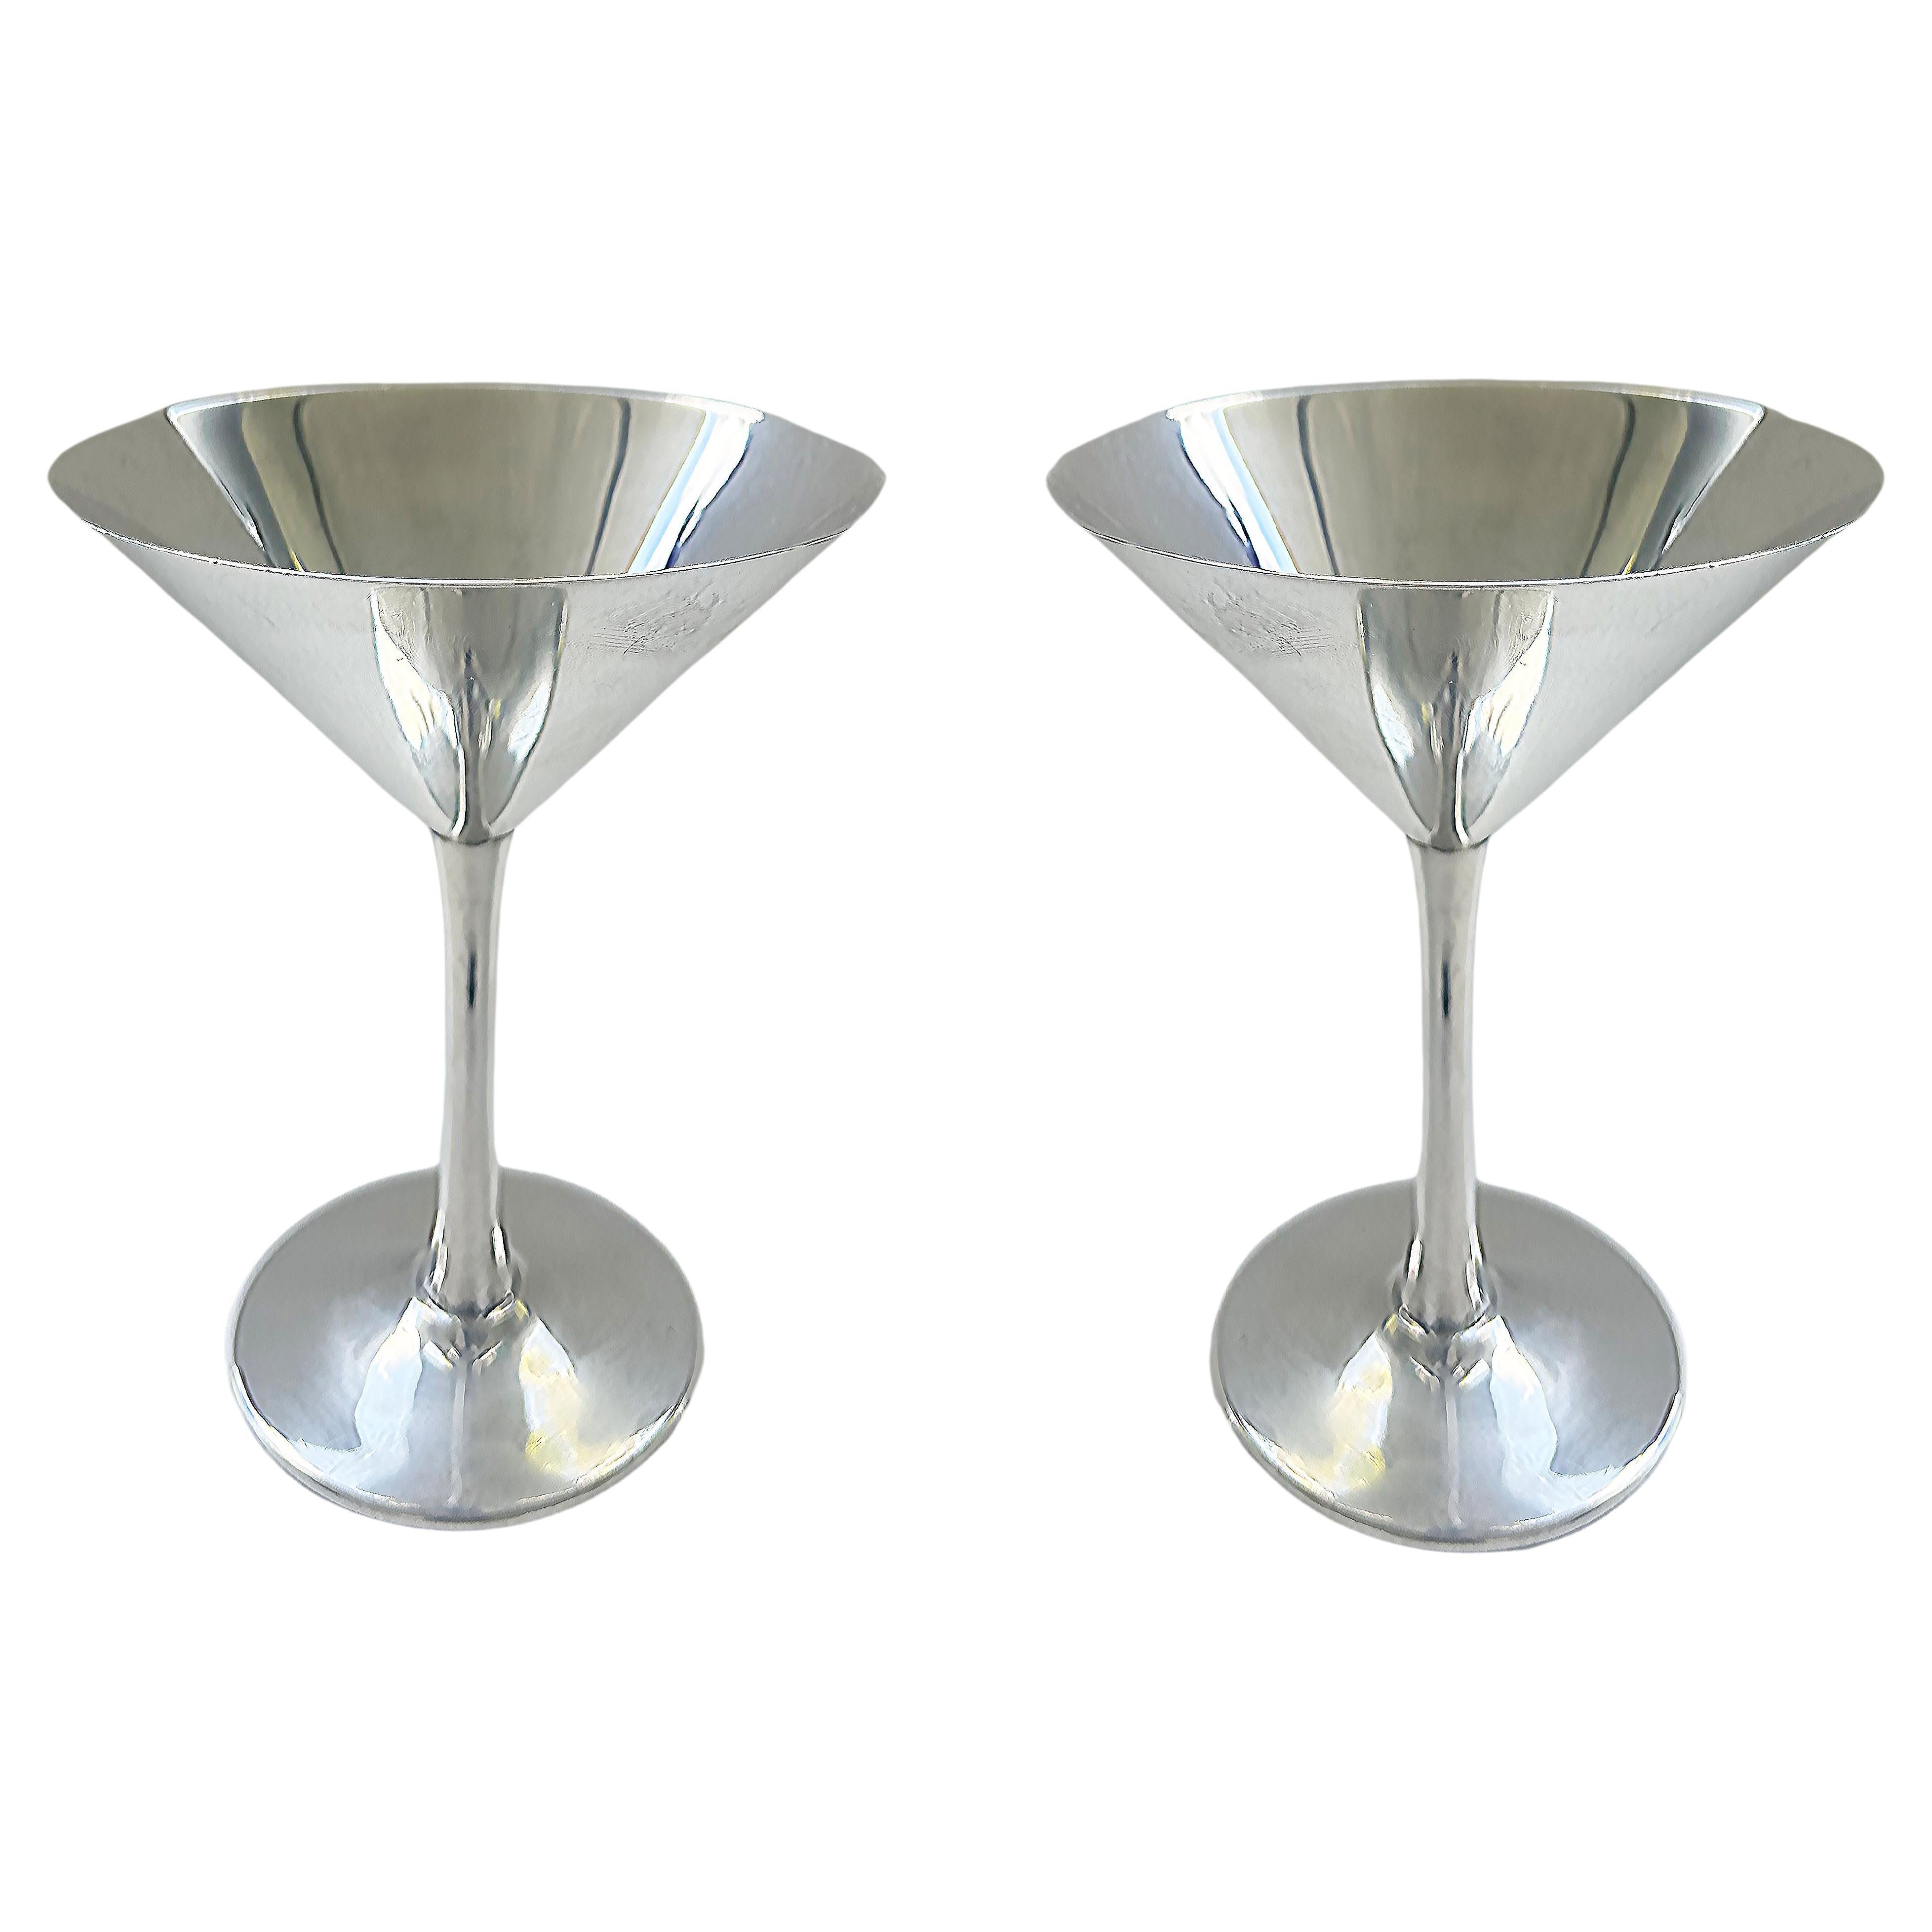 Cartier France Stamped 925 Sterling Silver Martini Goblets,  A Pair